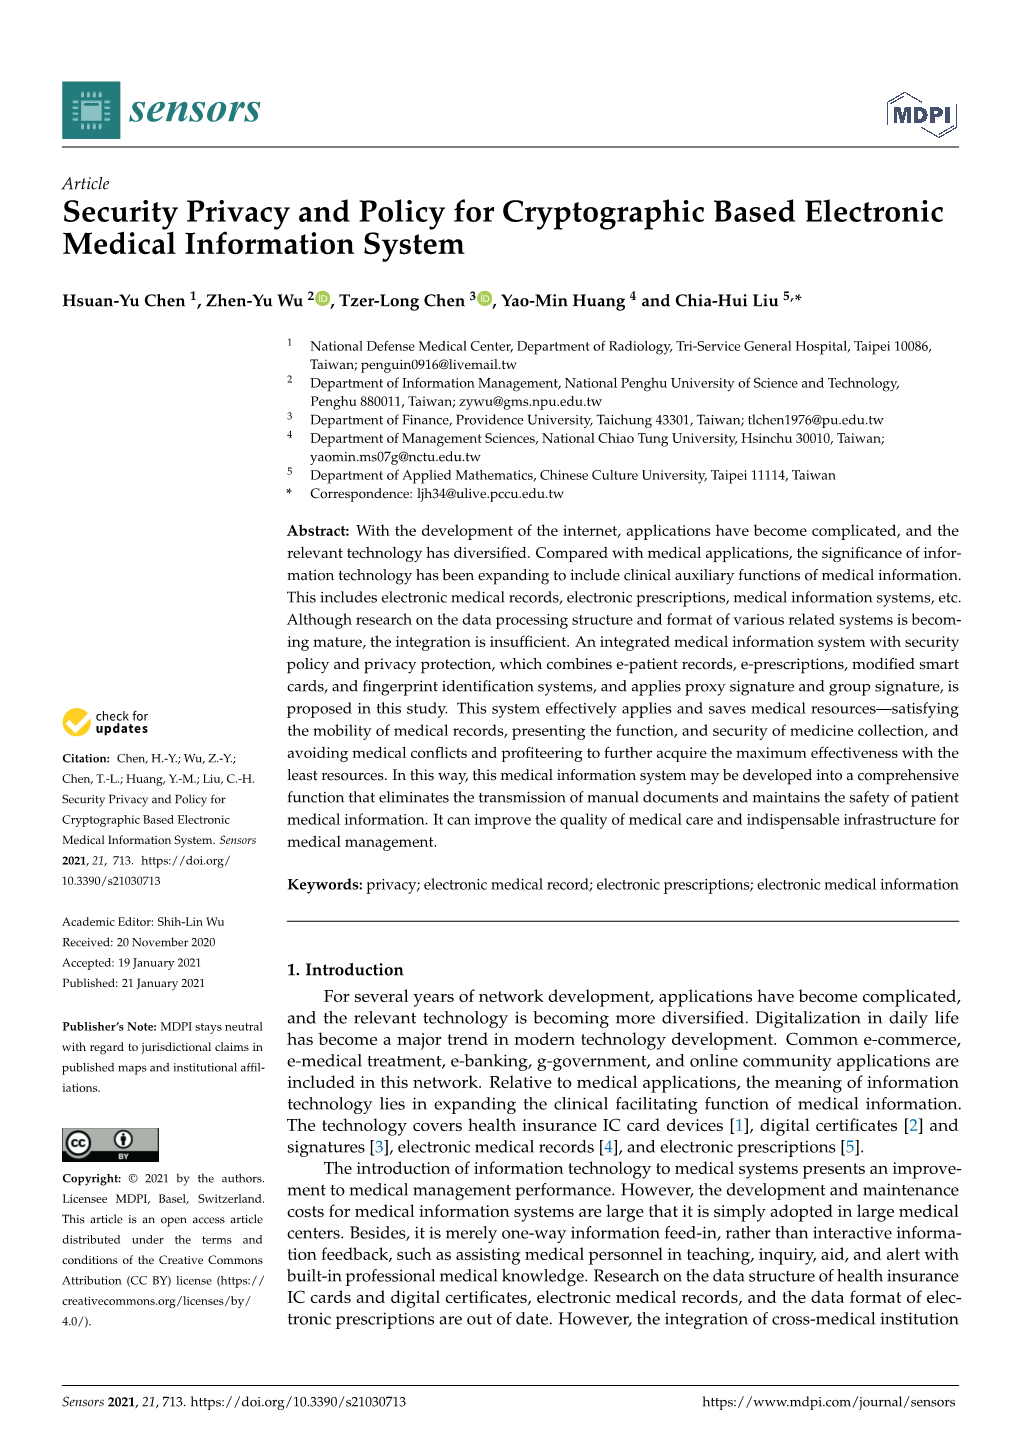 Security Privacy and Policy for Cryptographic Based Electronic Medical Information System